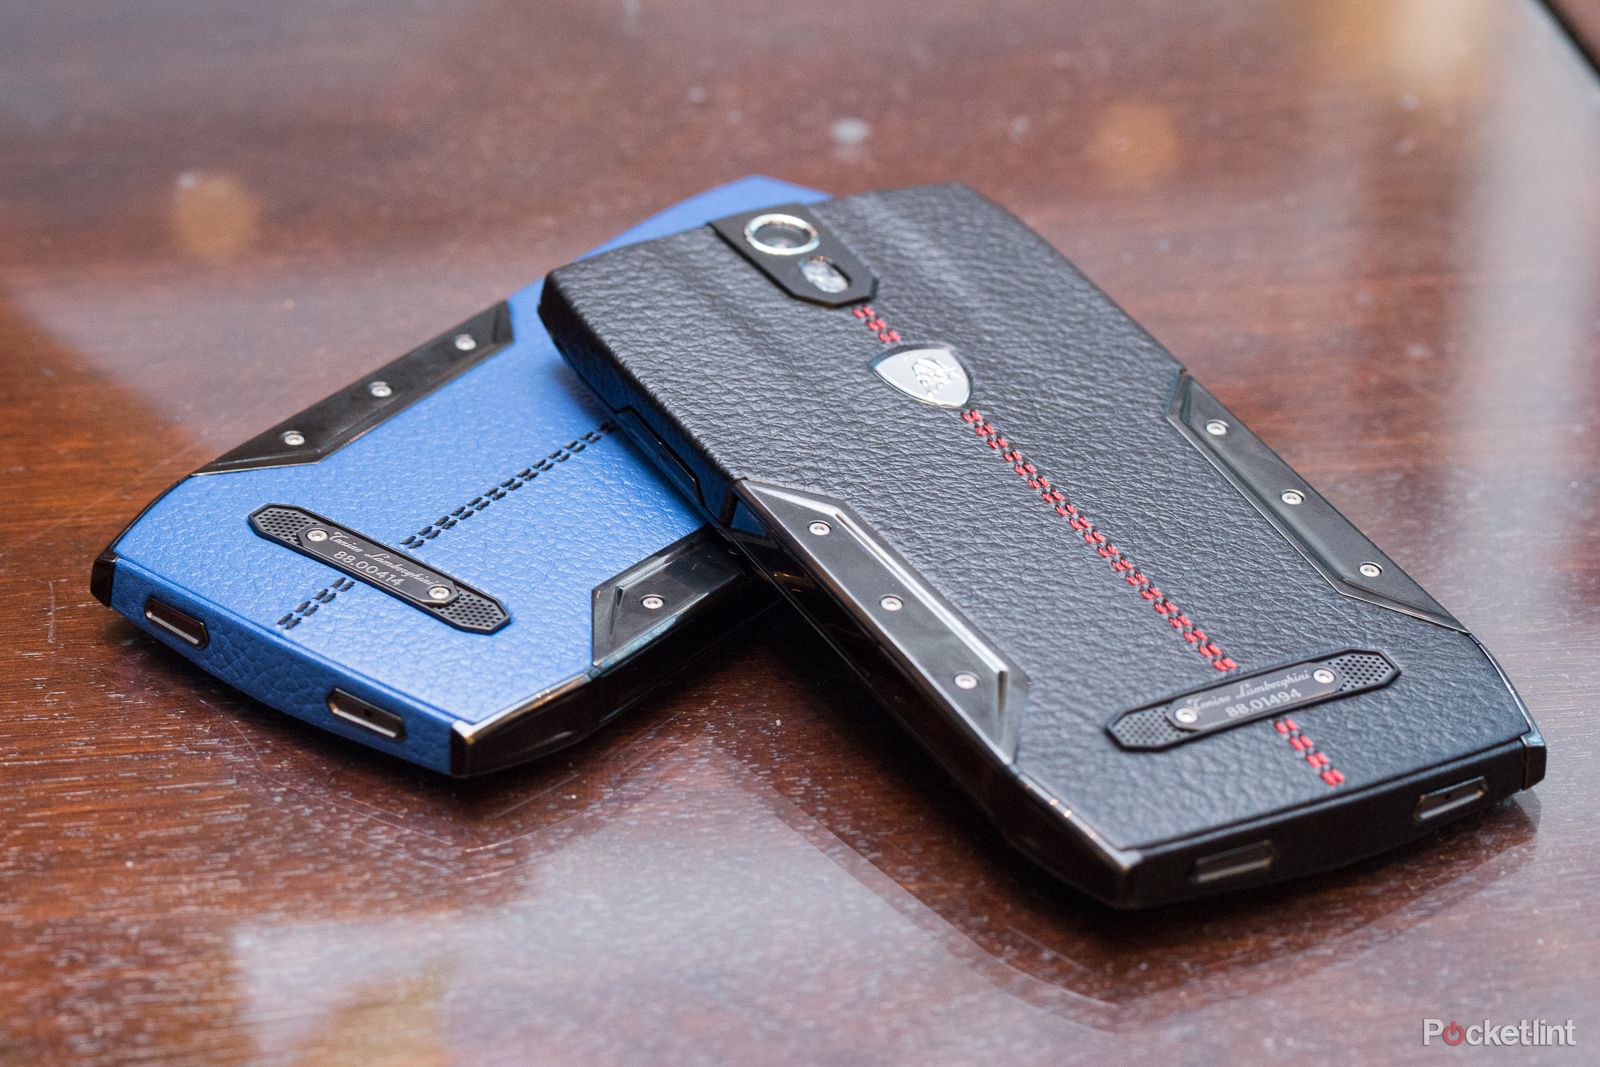 tonino lamborghini 88 tauri hands on with the 6 000 stainless steel and leather smartphone image 1